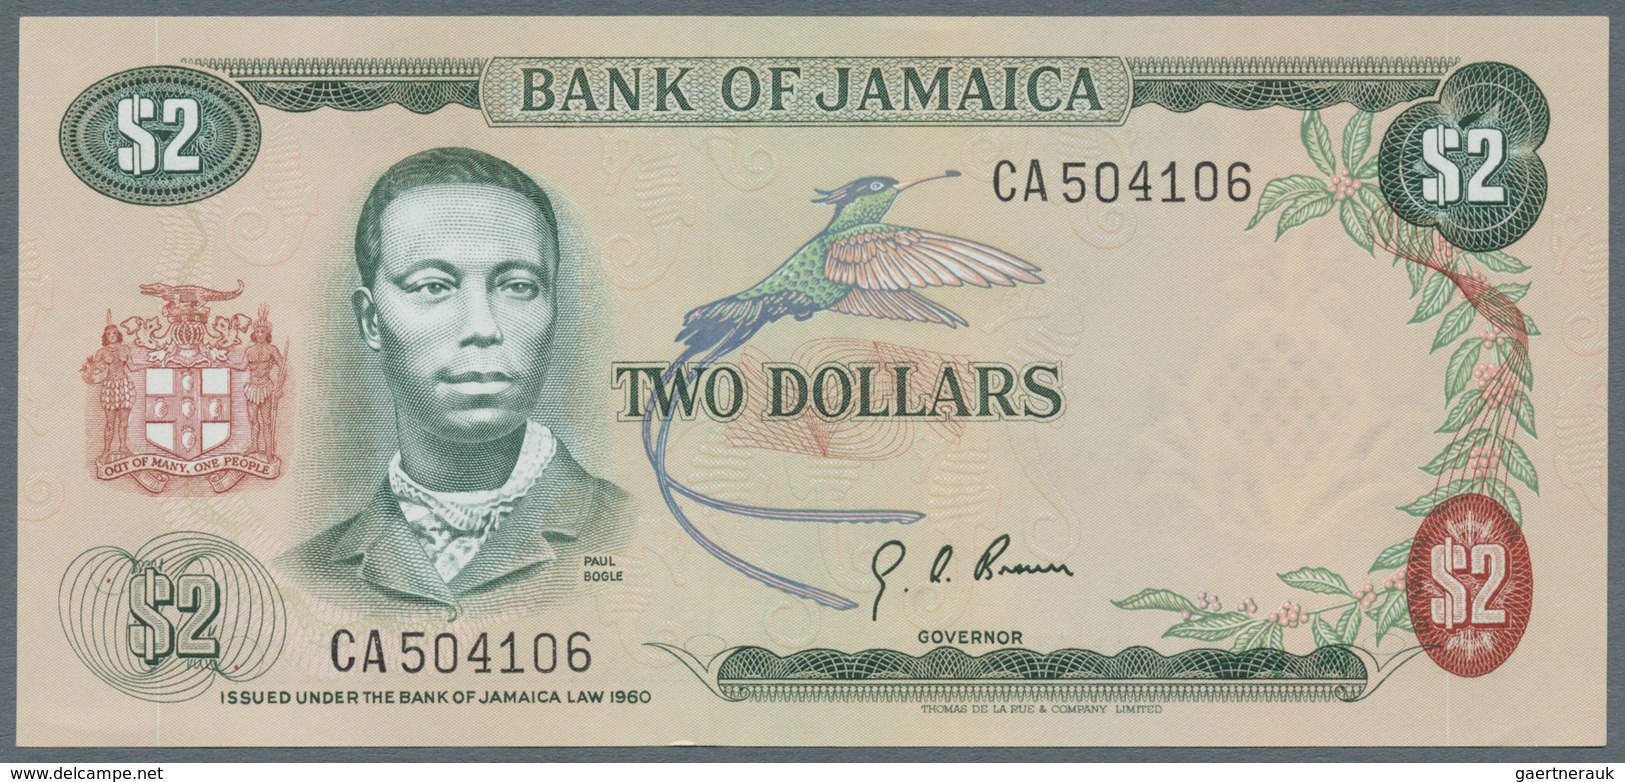 Jamaica: Lot with 38 banknotes Jamaica 1 - 500 Dollars ND(1970's) - 1999 in F- to UNC condition. (38